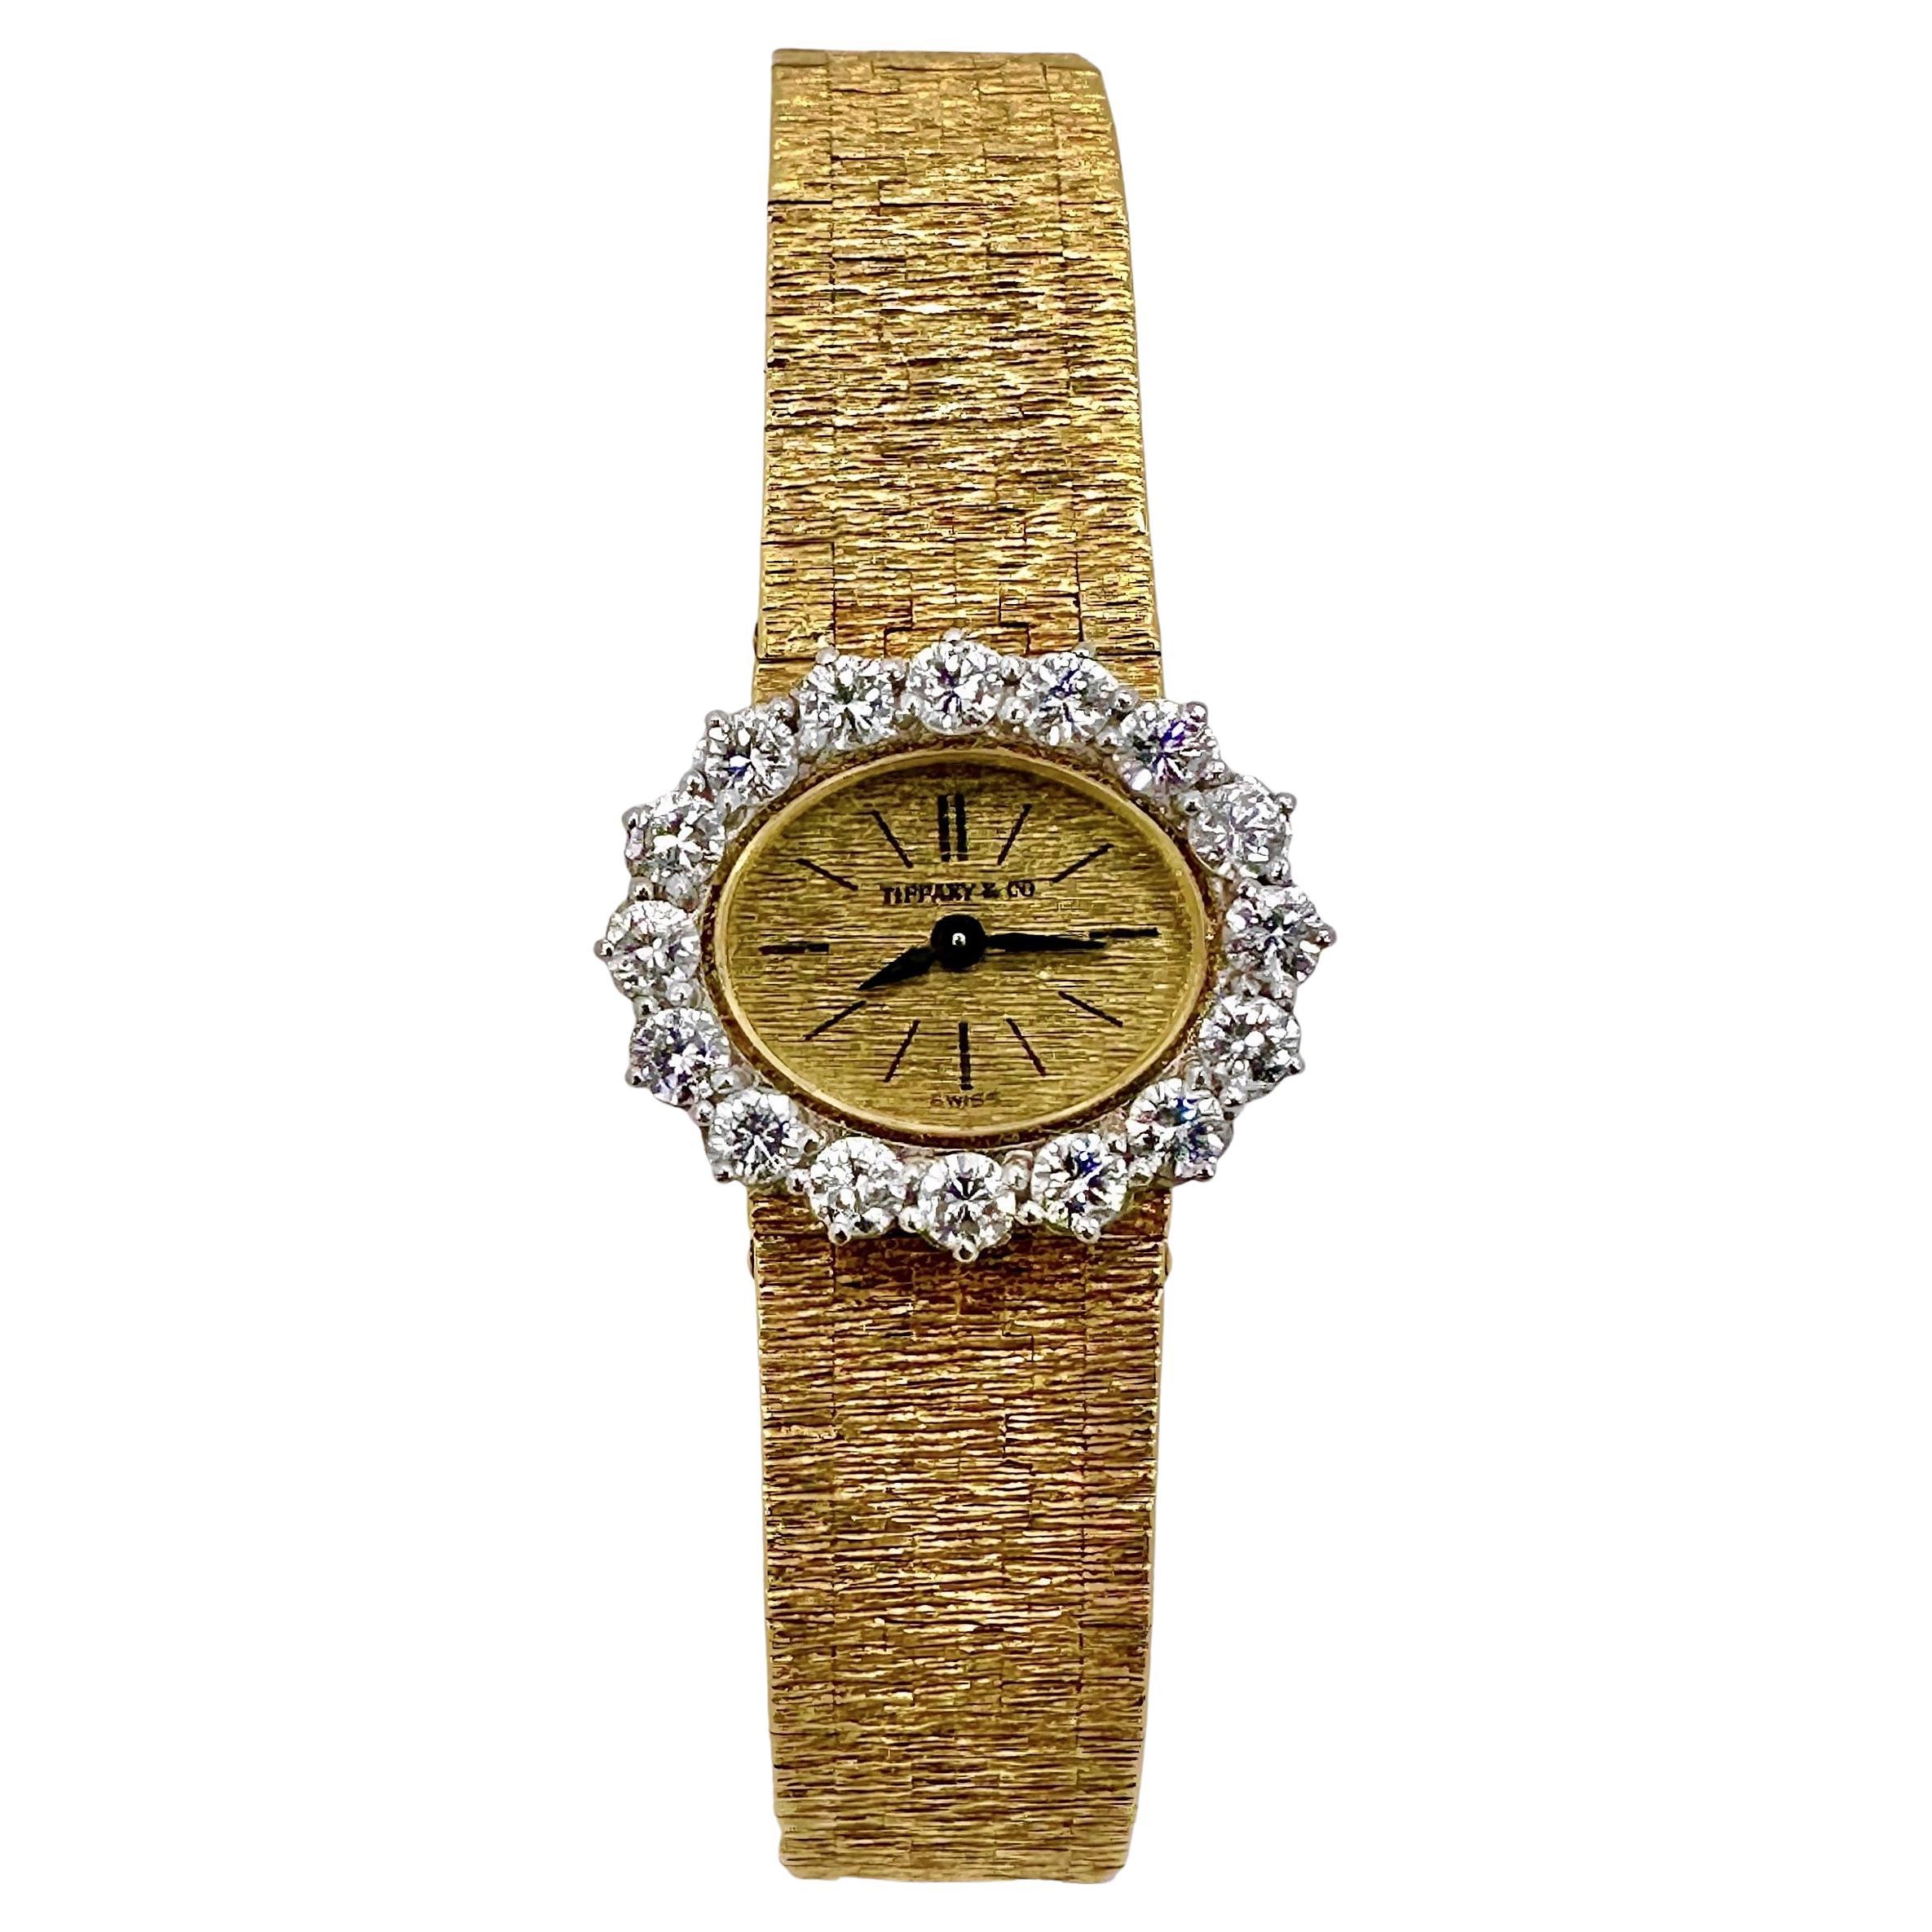 Vintage Ladies 18k Gold Tiffany & Co Wrist Watch with Diamond Bezel by Piaget For Sale